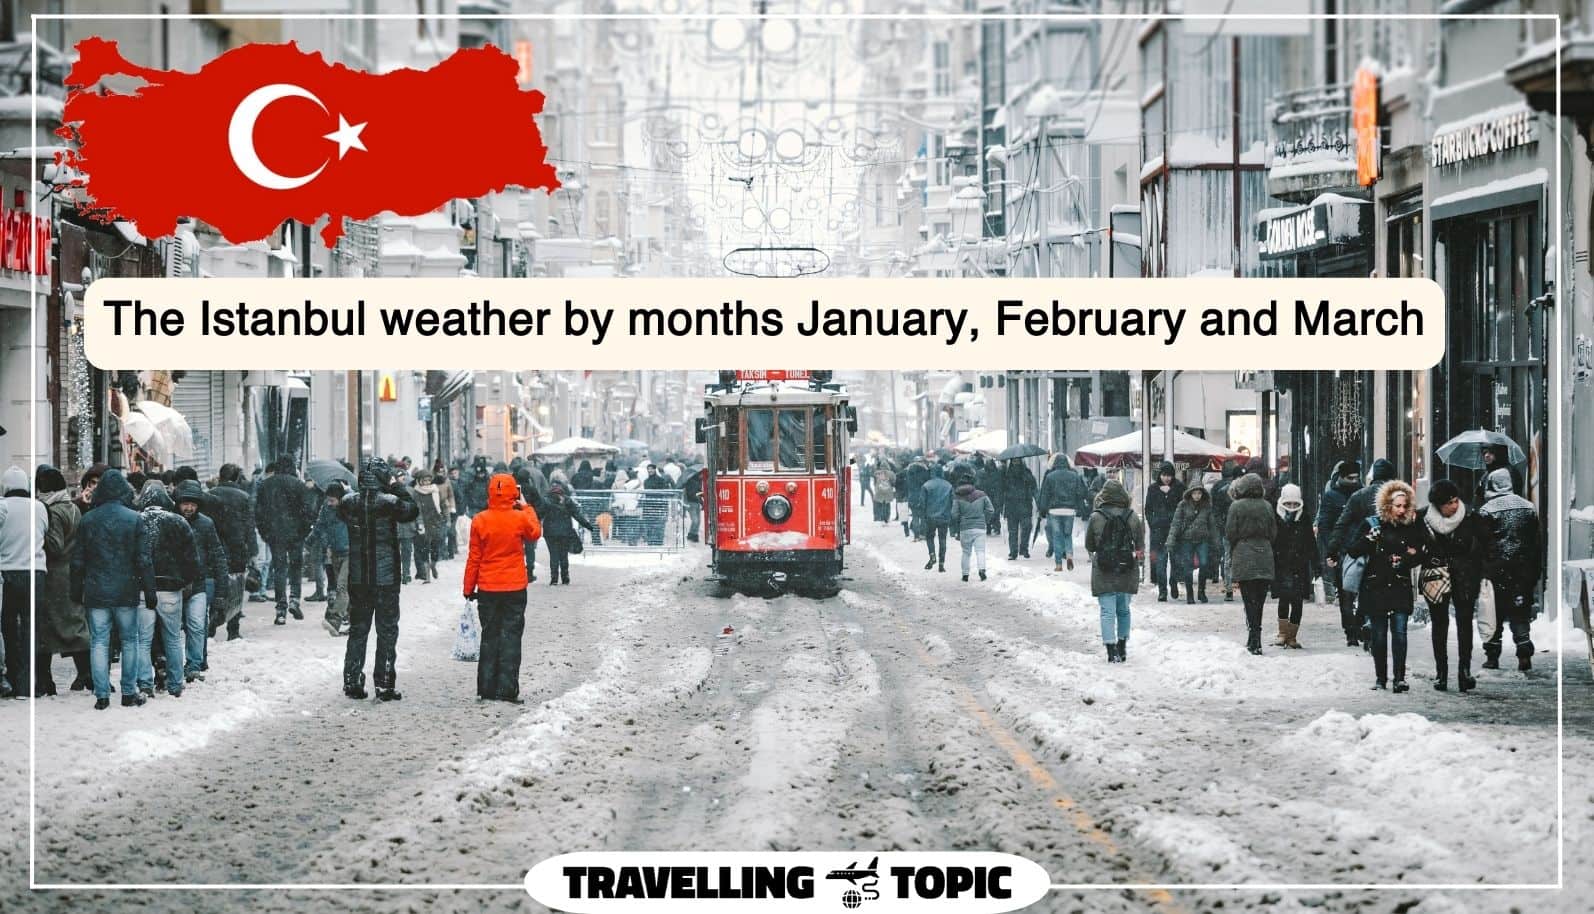 The Istanbul weather by months January, February and March